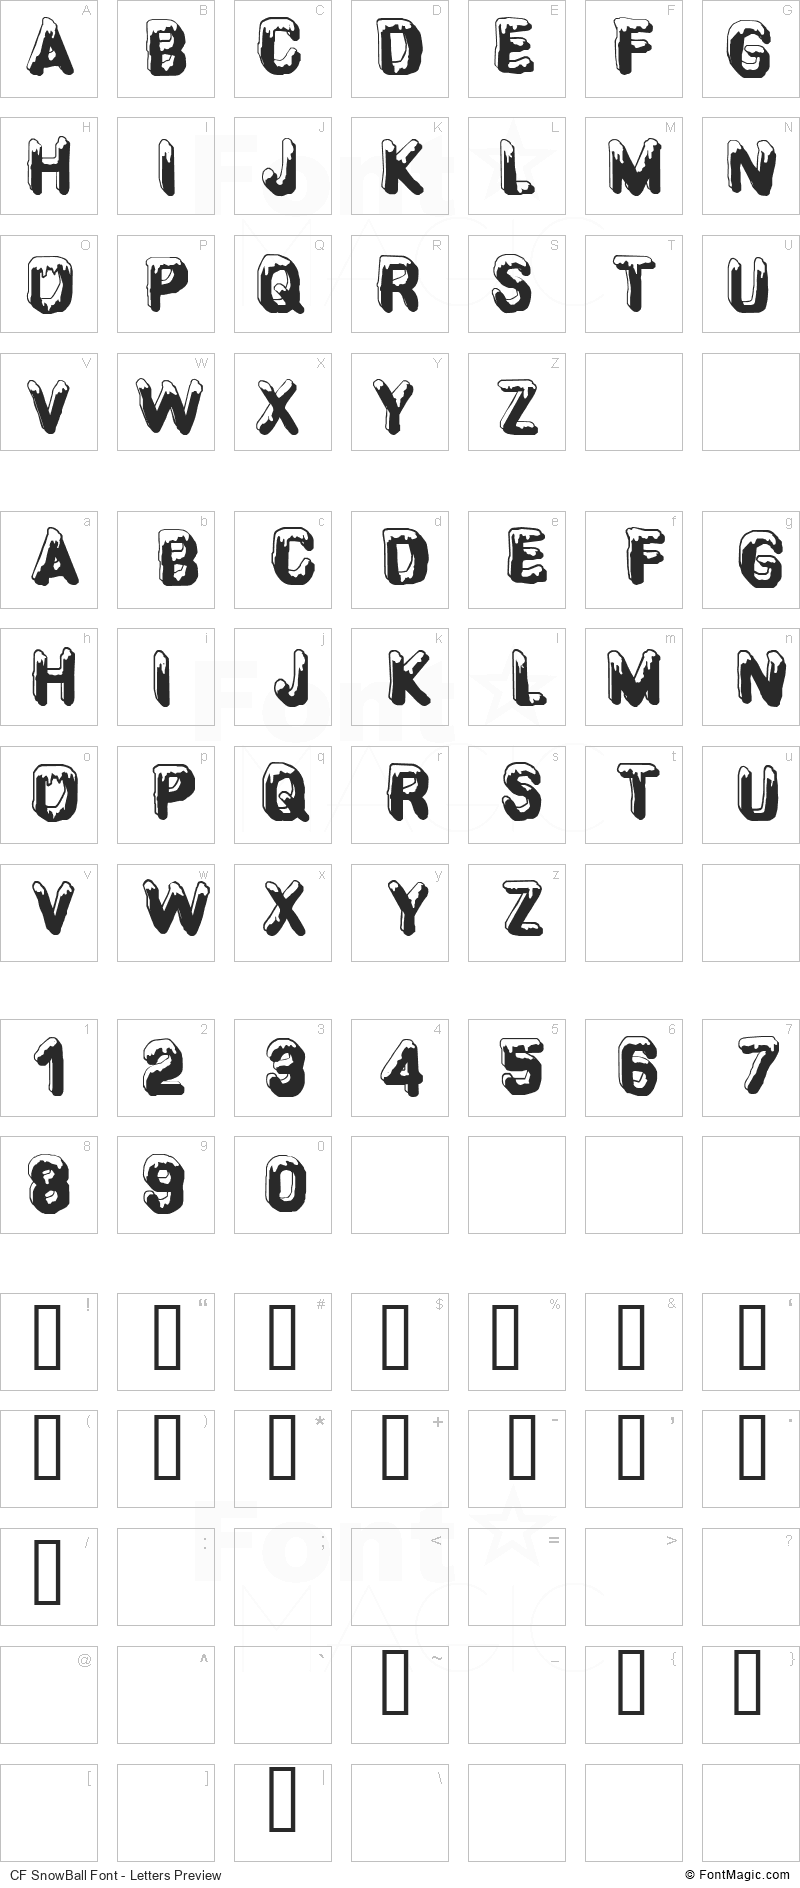 CF SnowBall Font - All Latters Preview Chart